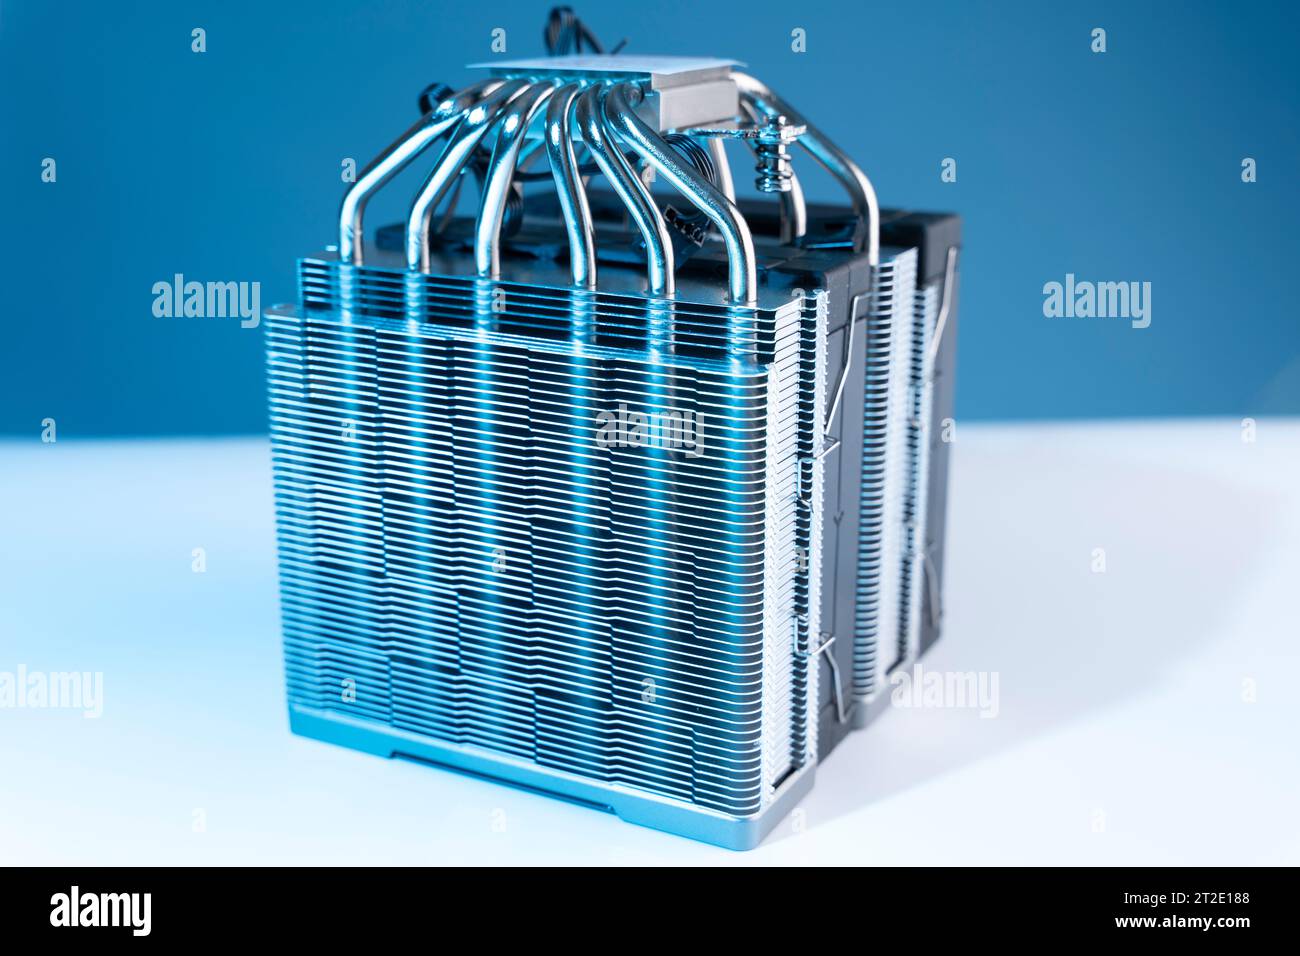 Computer fan. modern powerful cooler for cooling the CPU. Processor cooling system. concept of PC hardware. Air cooler of a personal computer processo Stock Photo